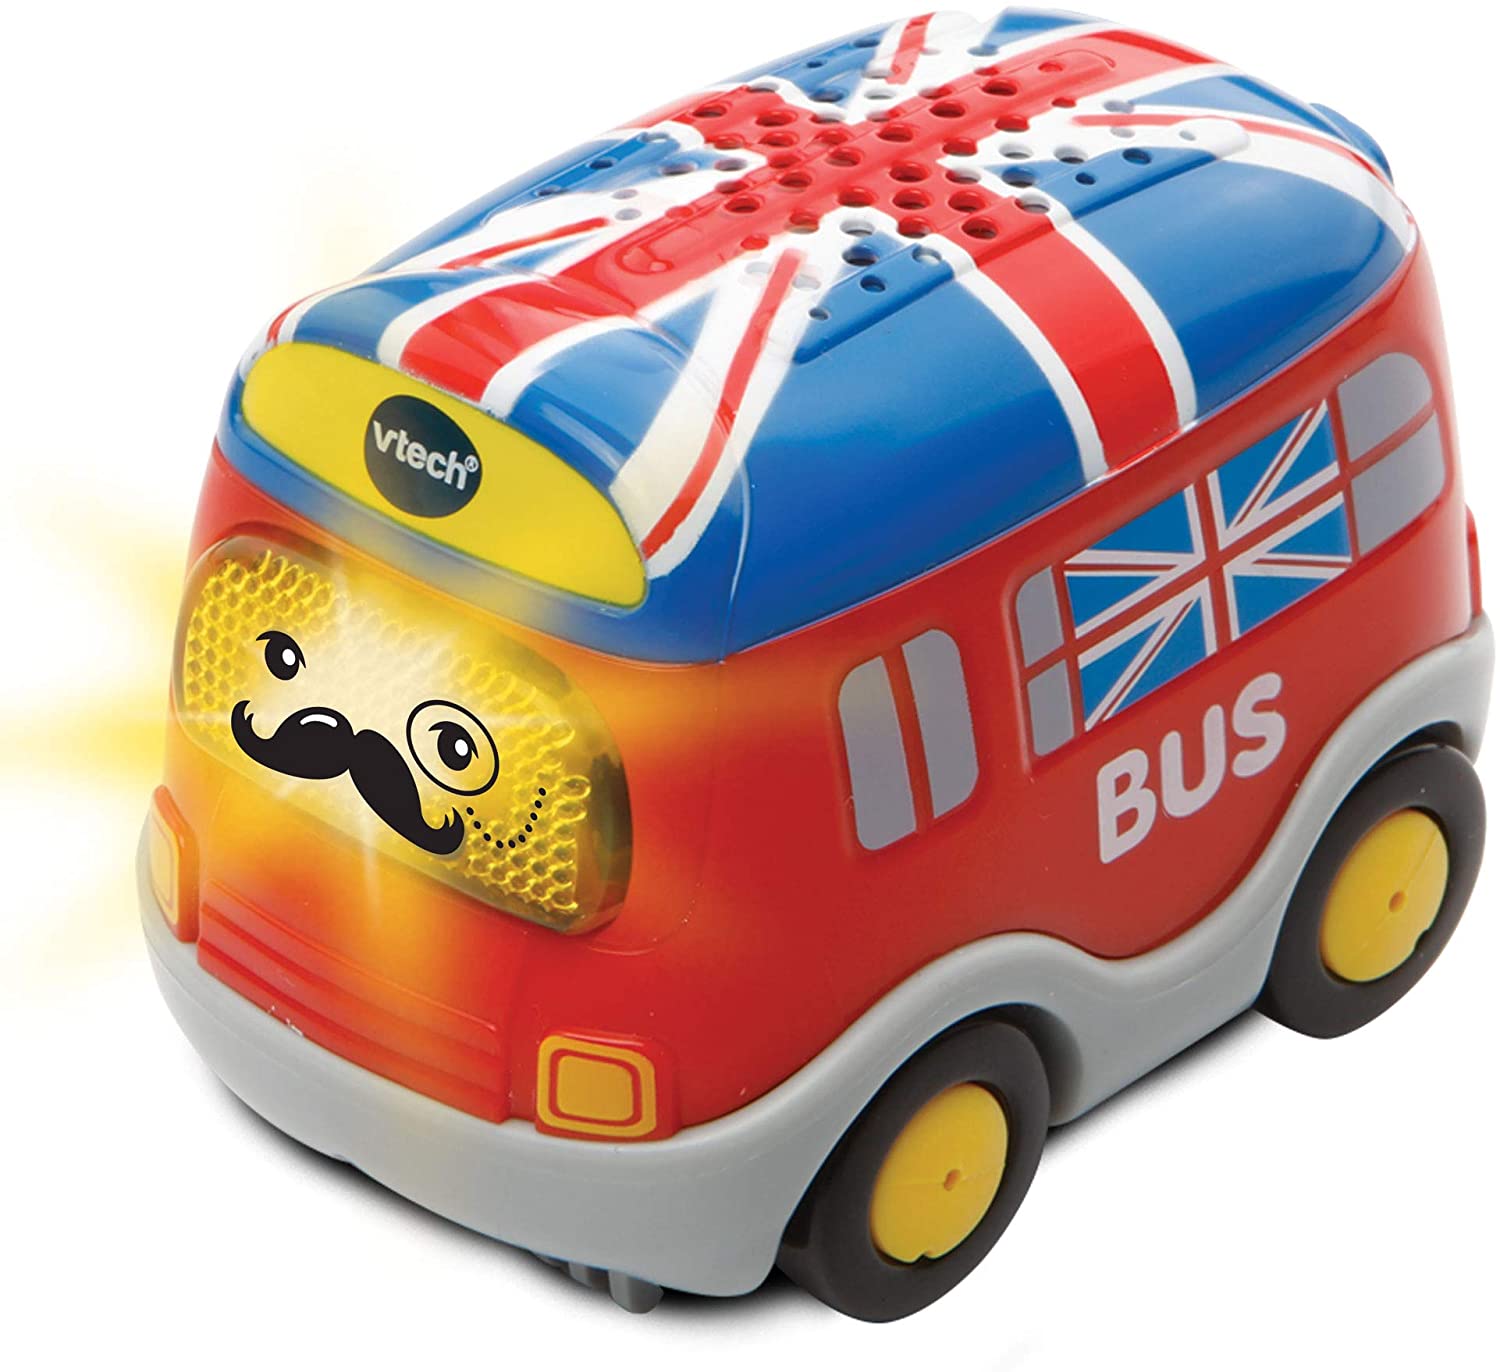 Vtech Toot Toot Union Jack Bus (80-164373)